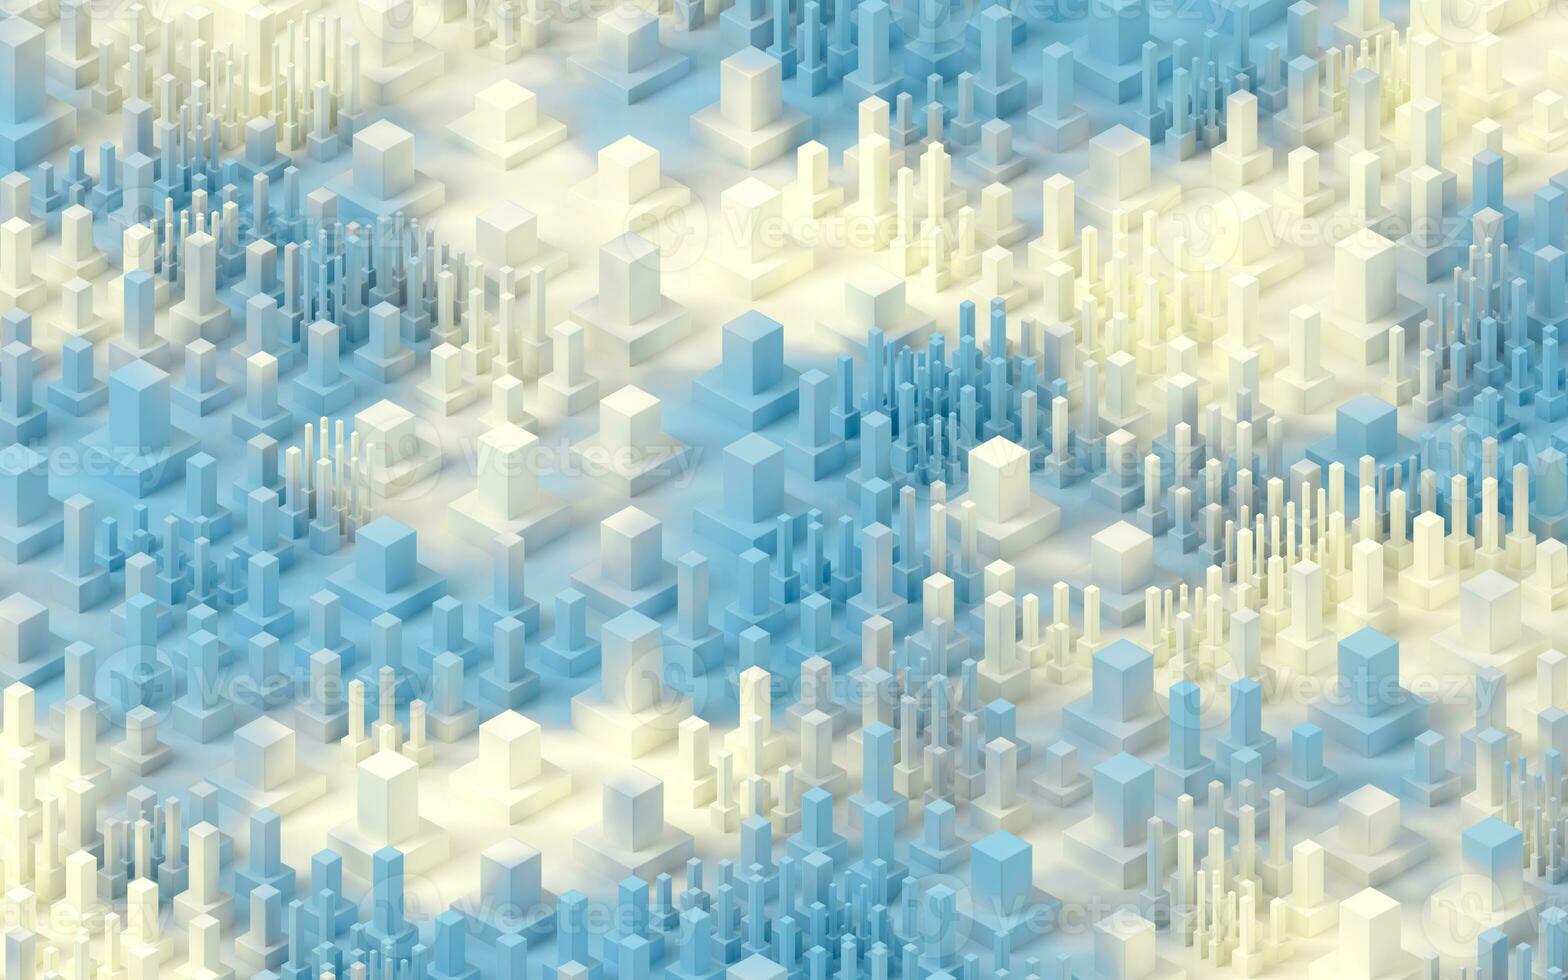 Large numbers of technological cubes, 3d rendering. photo